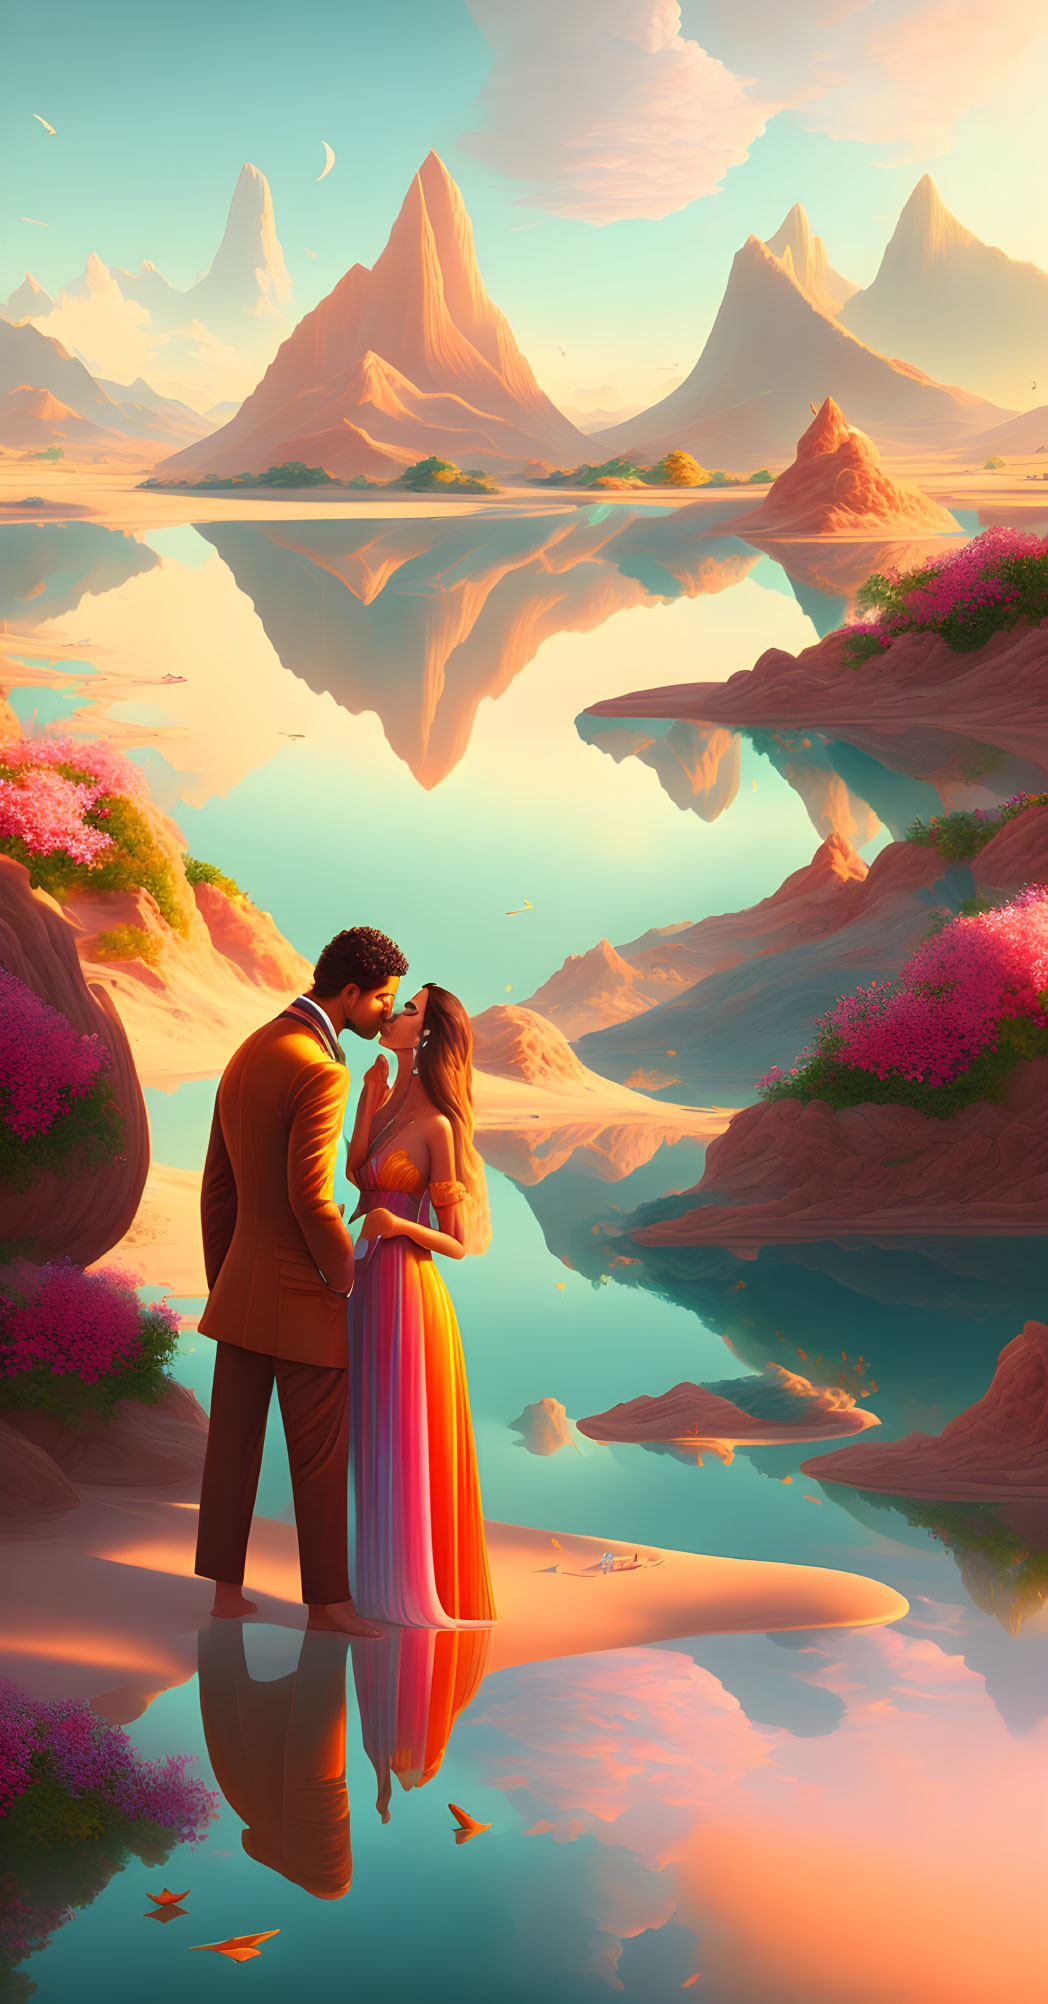 Couple on serene lakeshore with vibrant flowers, mountains, and mirrored lake